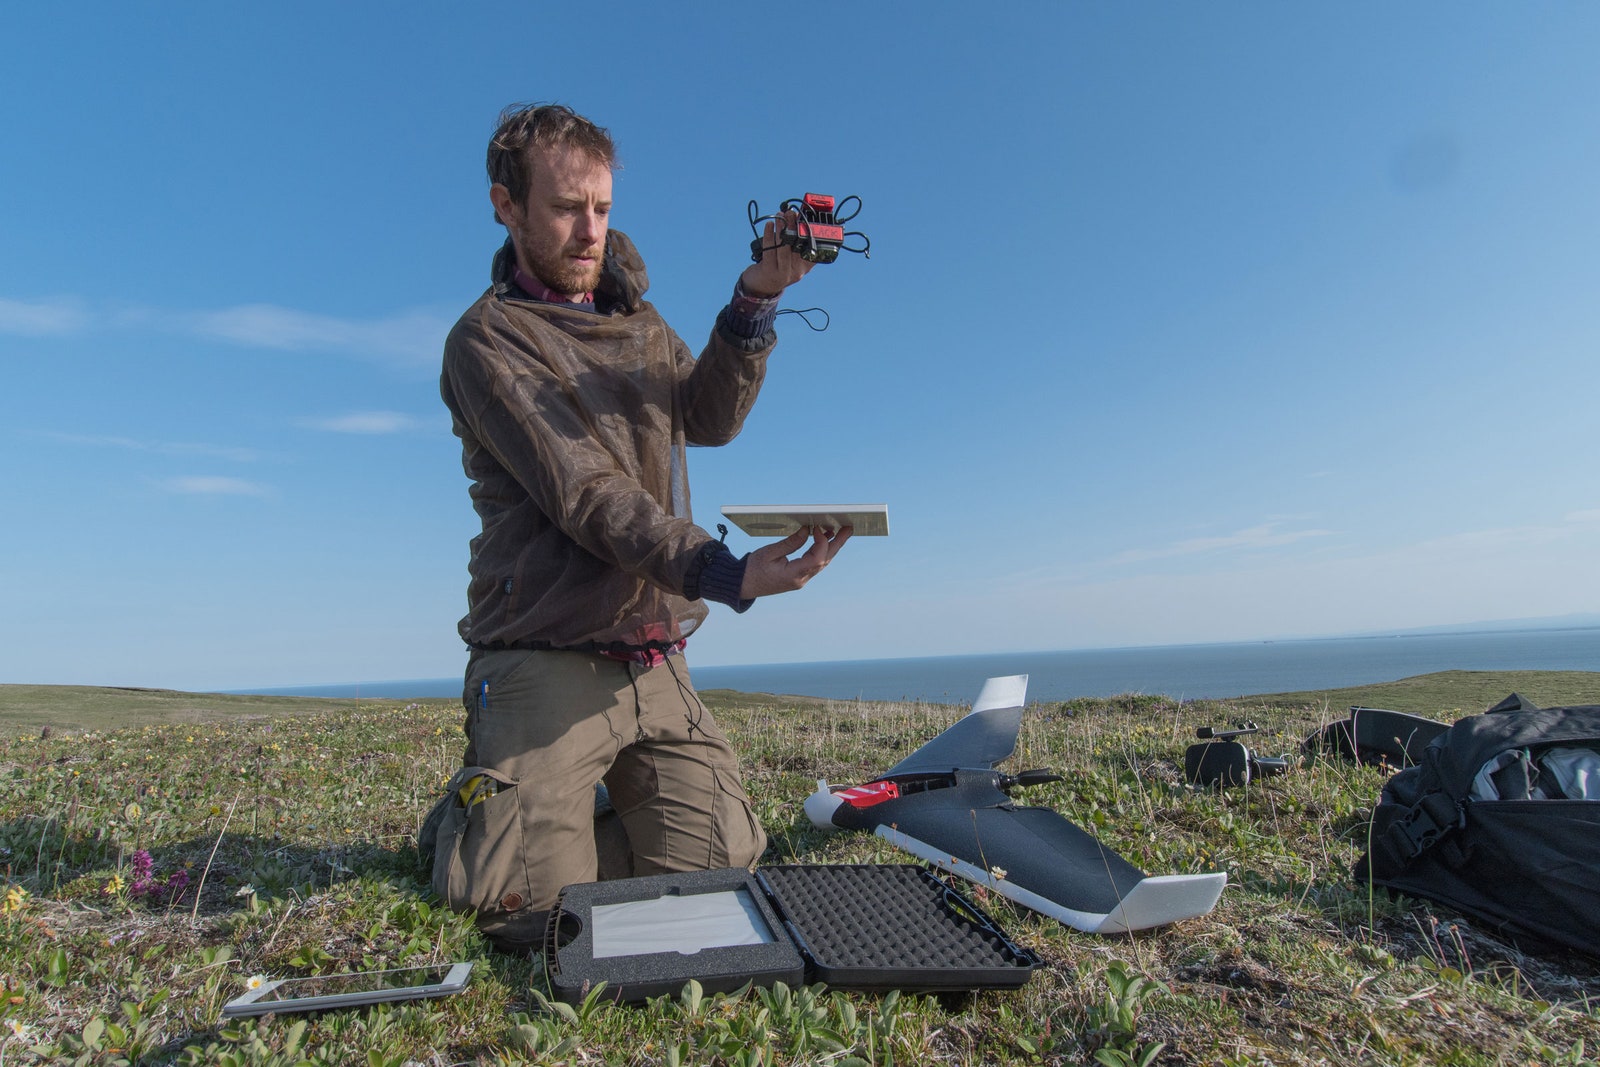 Jeff Kerby calibrating a drone sensor in a grass field